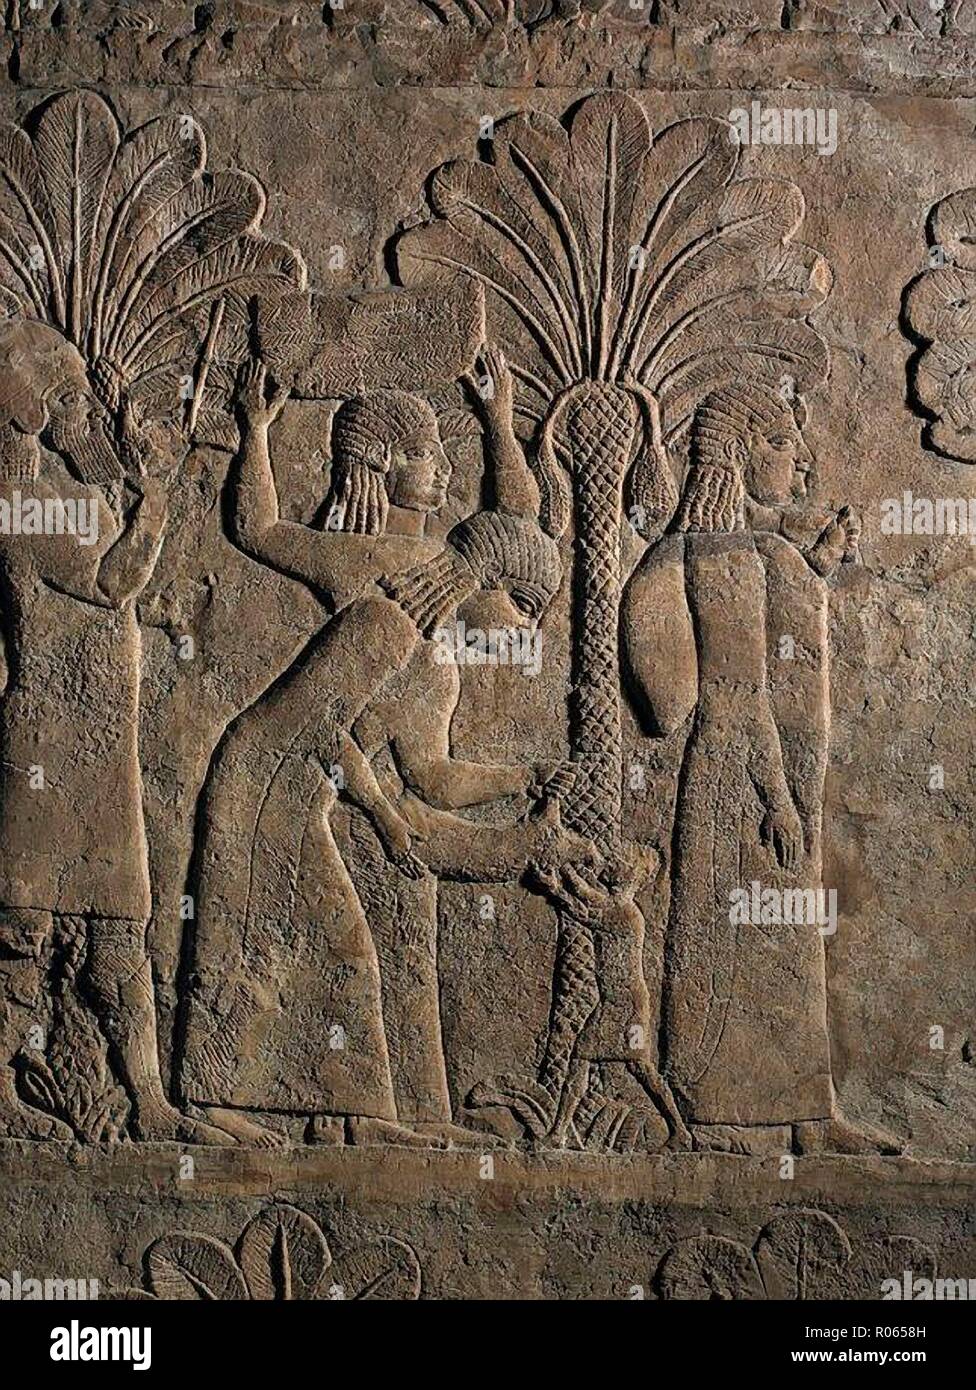 3663. WOMEN AND CHILDREN BEING DRIVEN AWAY FROM A CITY CAPTURED BY THE ASSYRIANS.  PIC: A WOMAN (POSSIBLY HIS MOTHER) GIVING WATER TO A CHILD FROM A WATER SKIN.  RELIEF FROM ASHURBANIPAL'S PALACE IN NINVEH, C. 7TH. C. BC Stock Photo